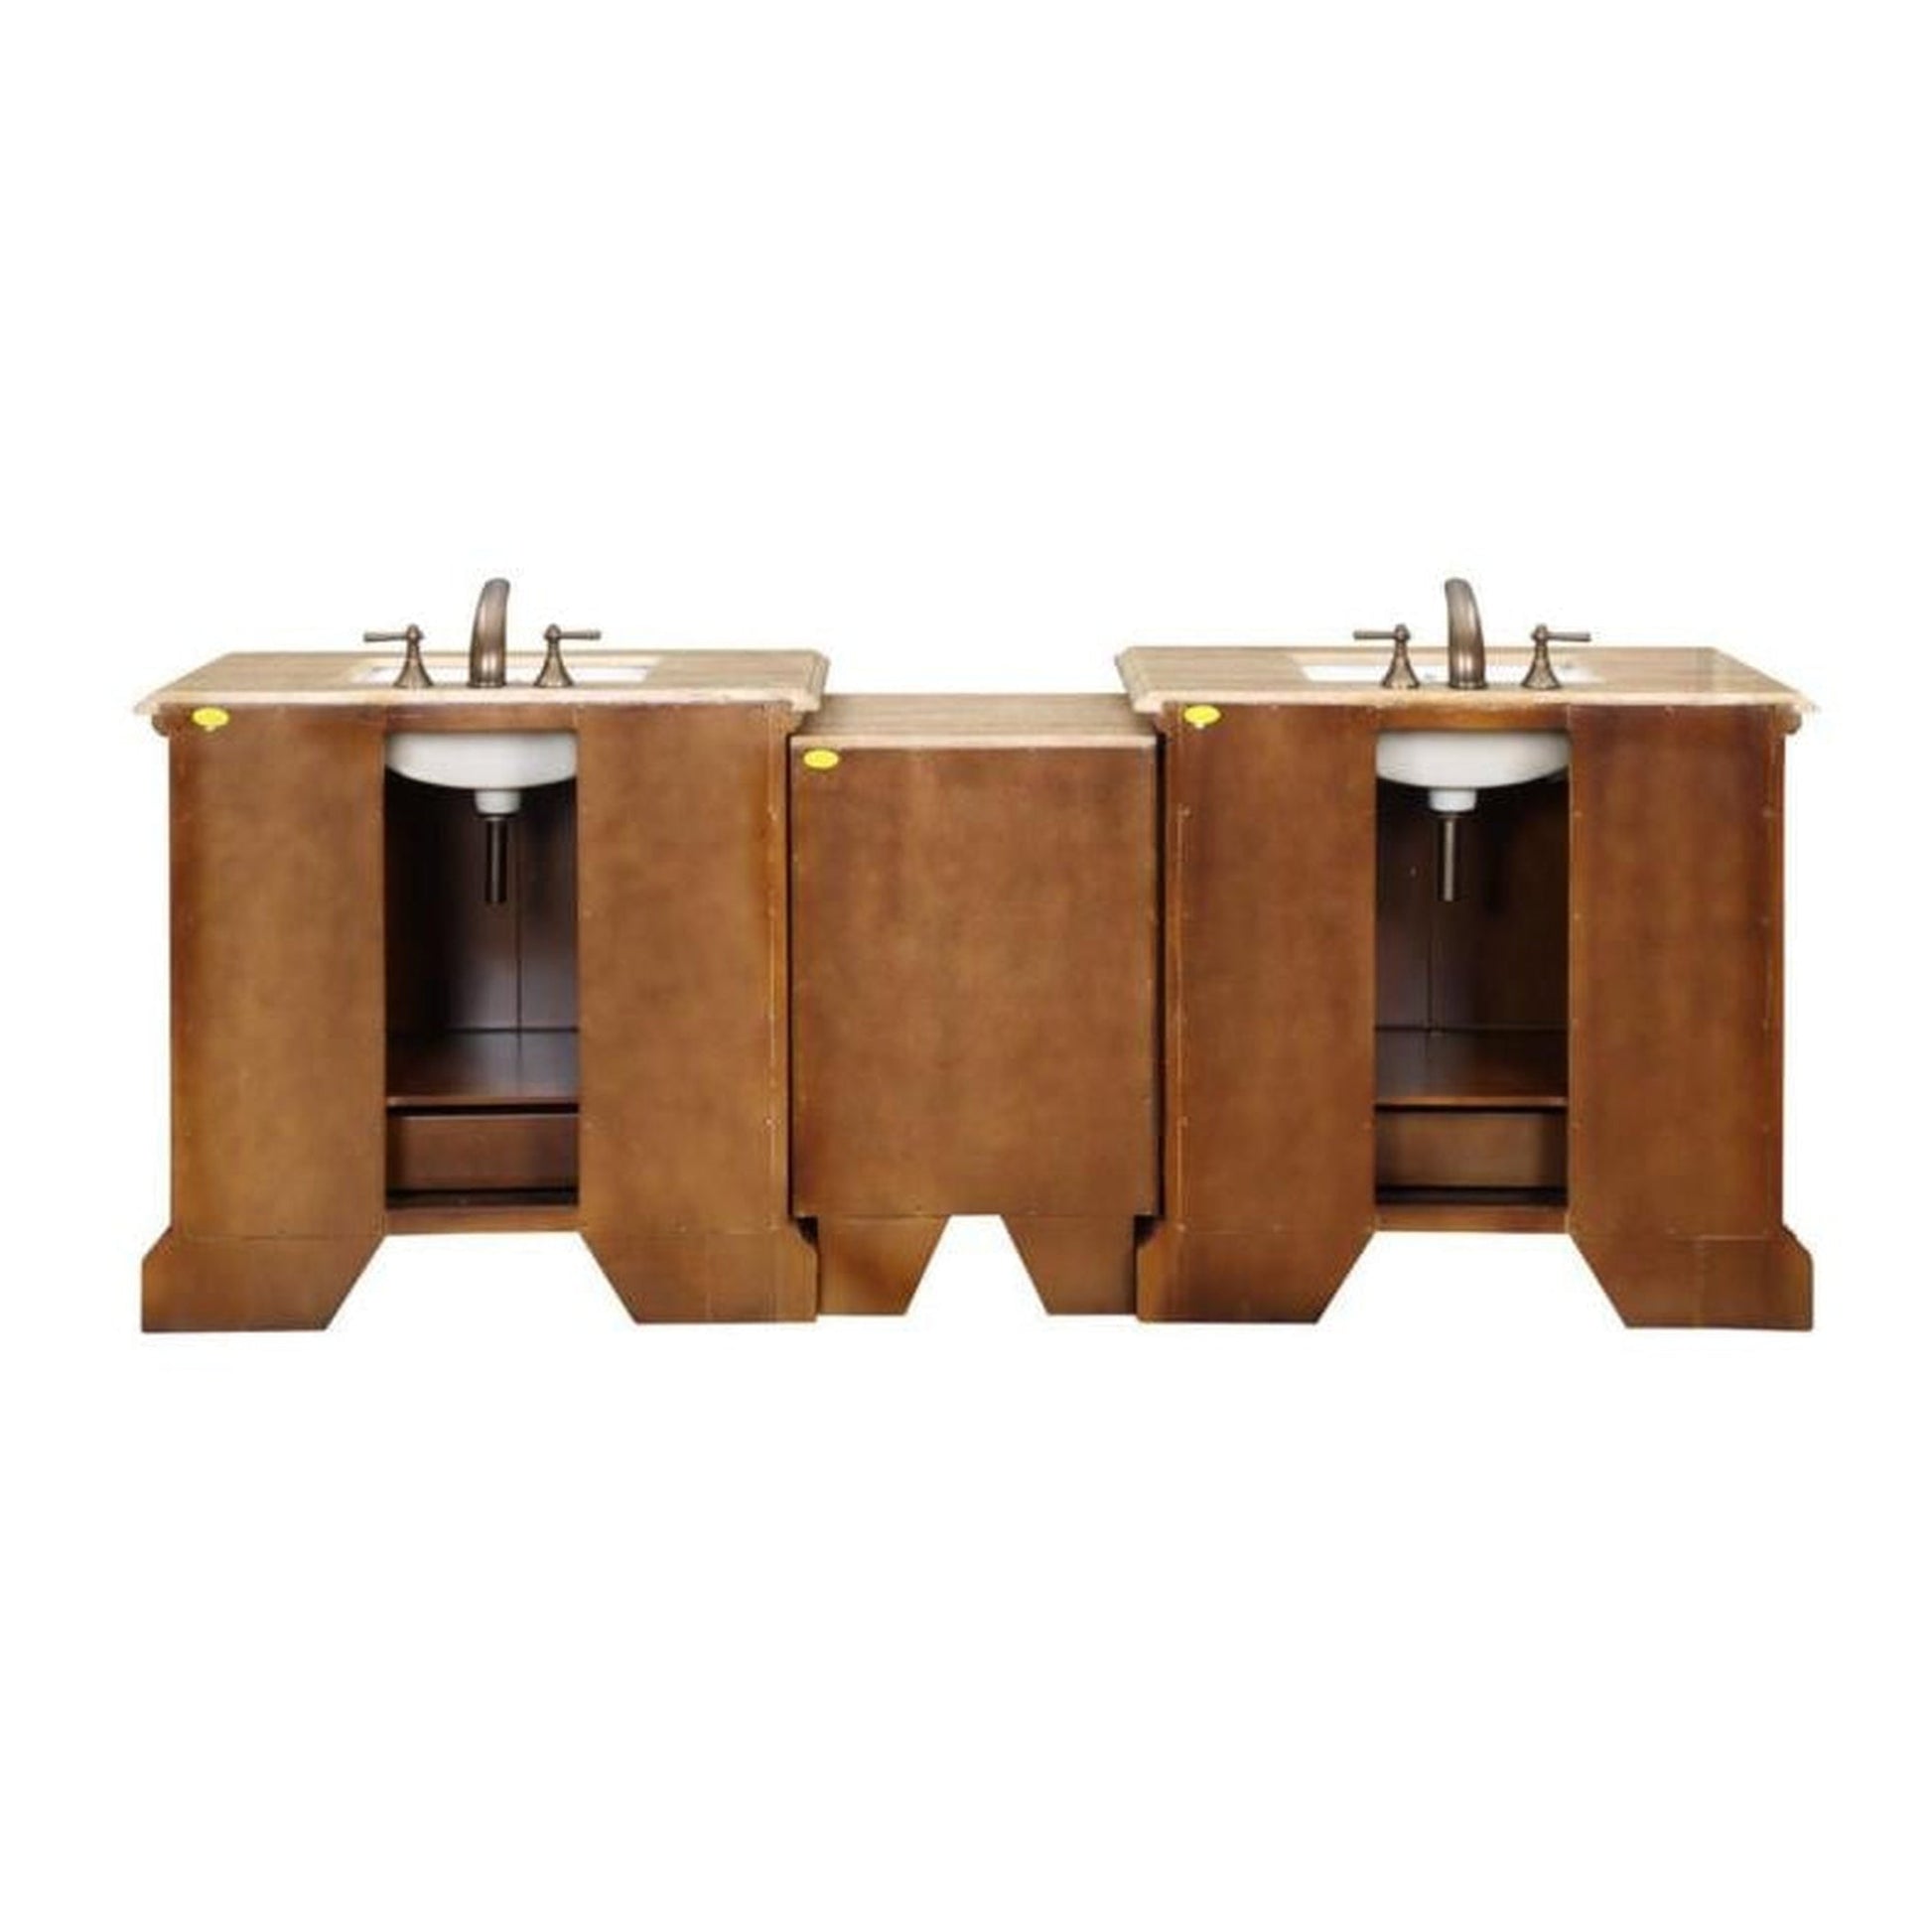 Silkroad Exclusive 95" Double Sink Cherry Modular Bathroom Vanity With Travertine Countertop and White Ceramic Undermount Sink